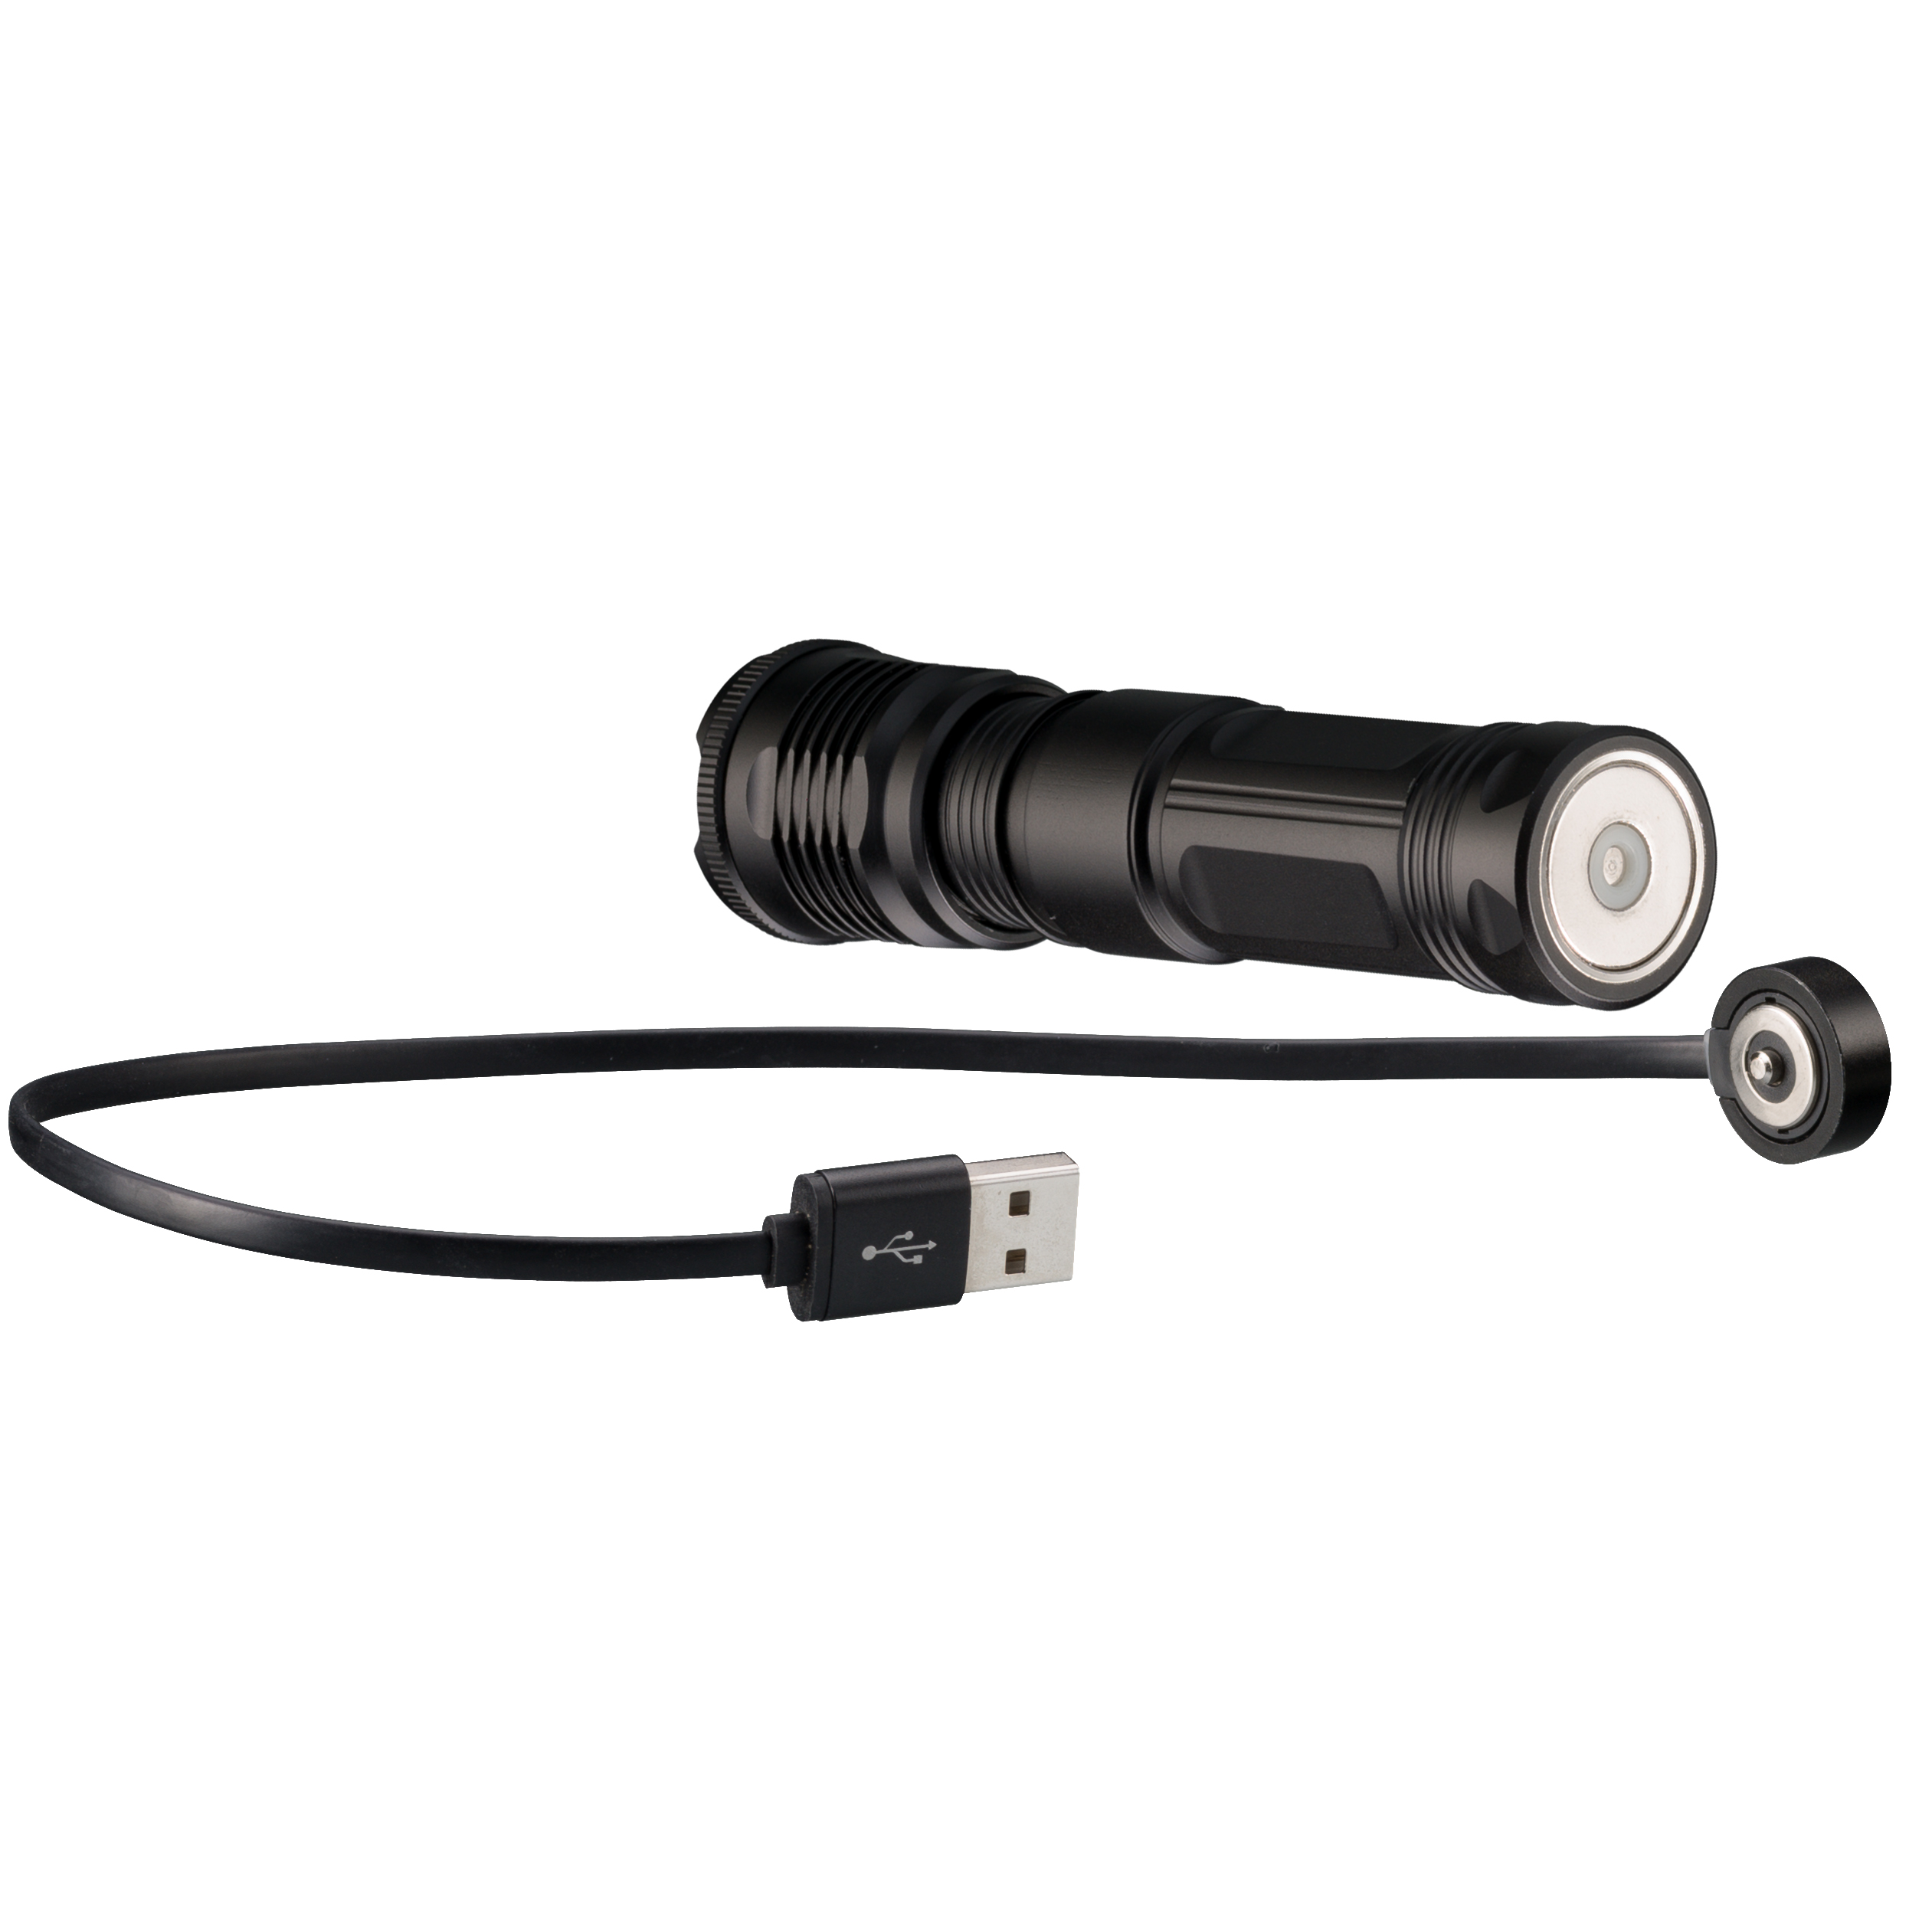 Lampe torche zoom LED 1000 lm NATIONAL GEOGRAPHIC ILUMINOS 1000